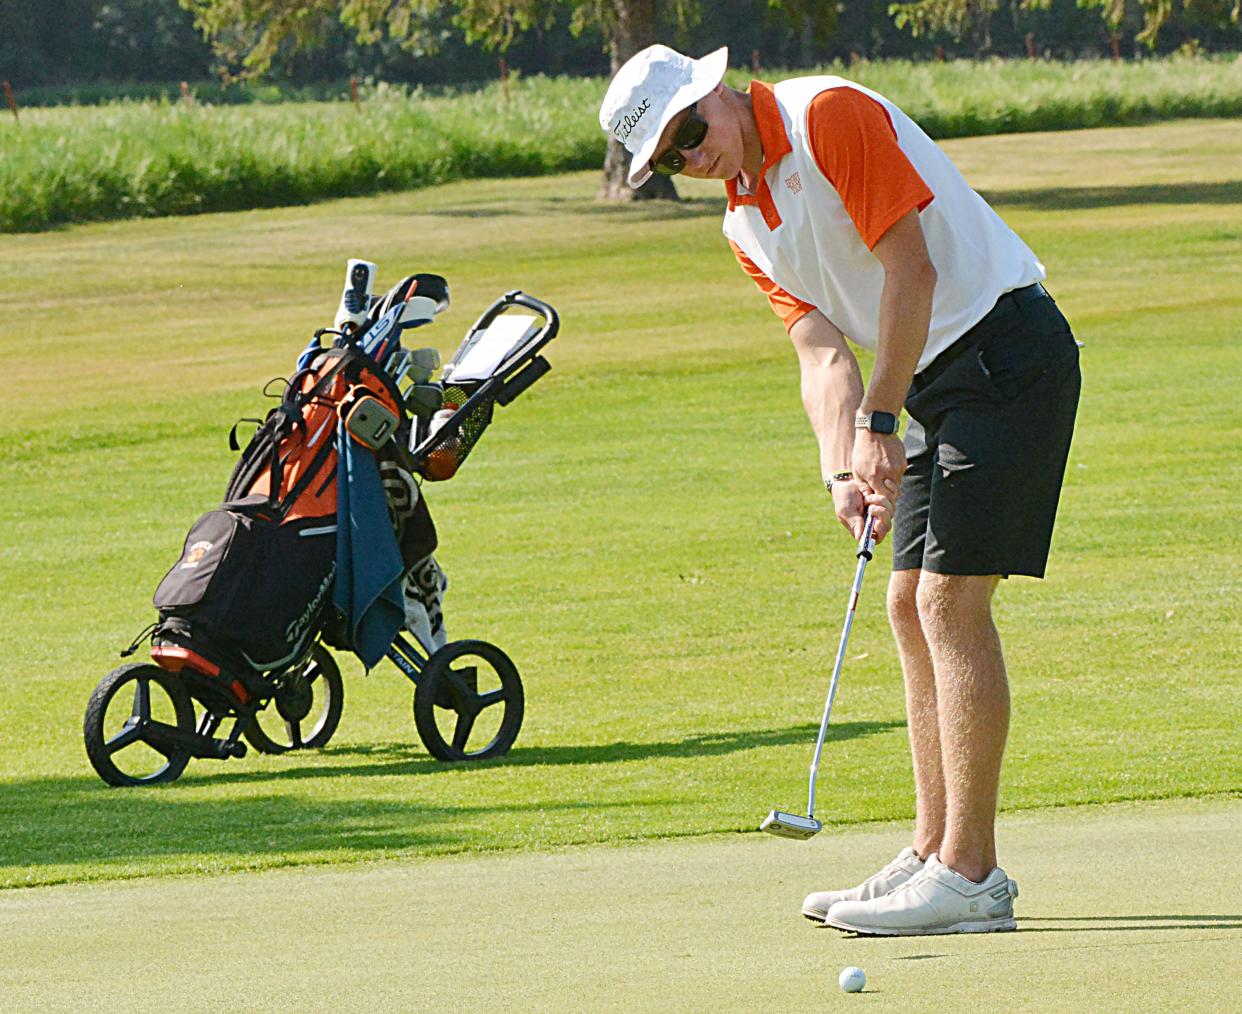 Chet Peterson of Ipswich putts on No. 4 at the Prairie Winds Golf Club during the opening day of the state Class B boys golf tournament on Monday, June 5, 2023 in Watertown.